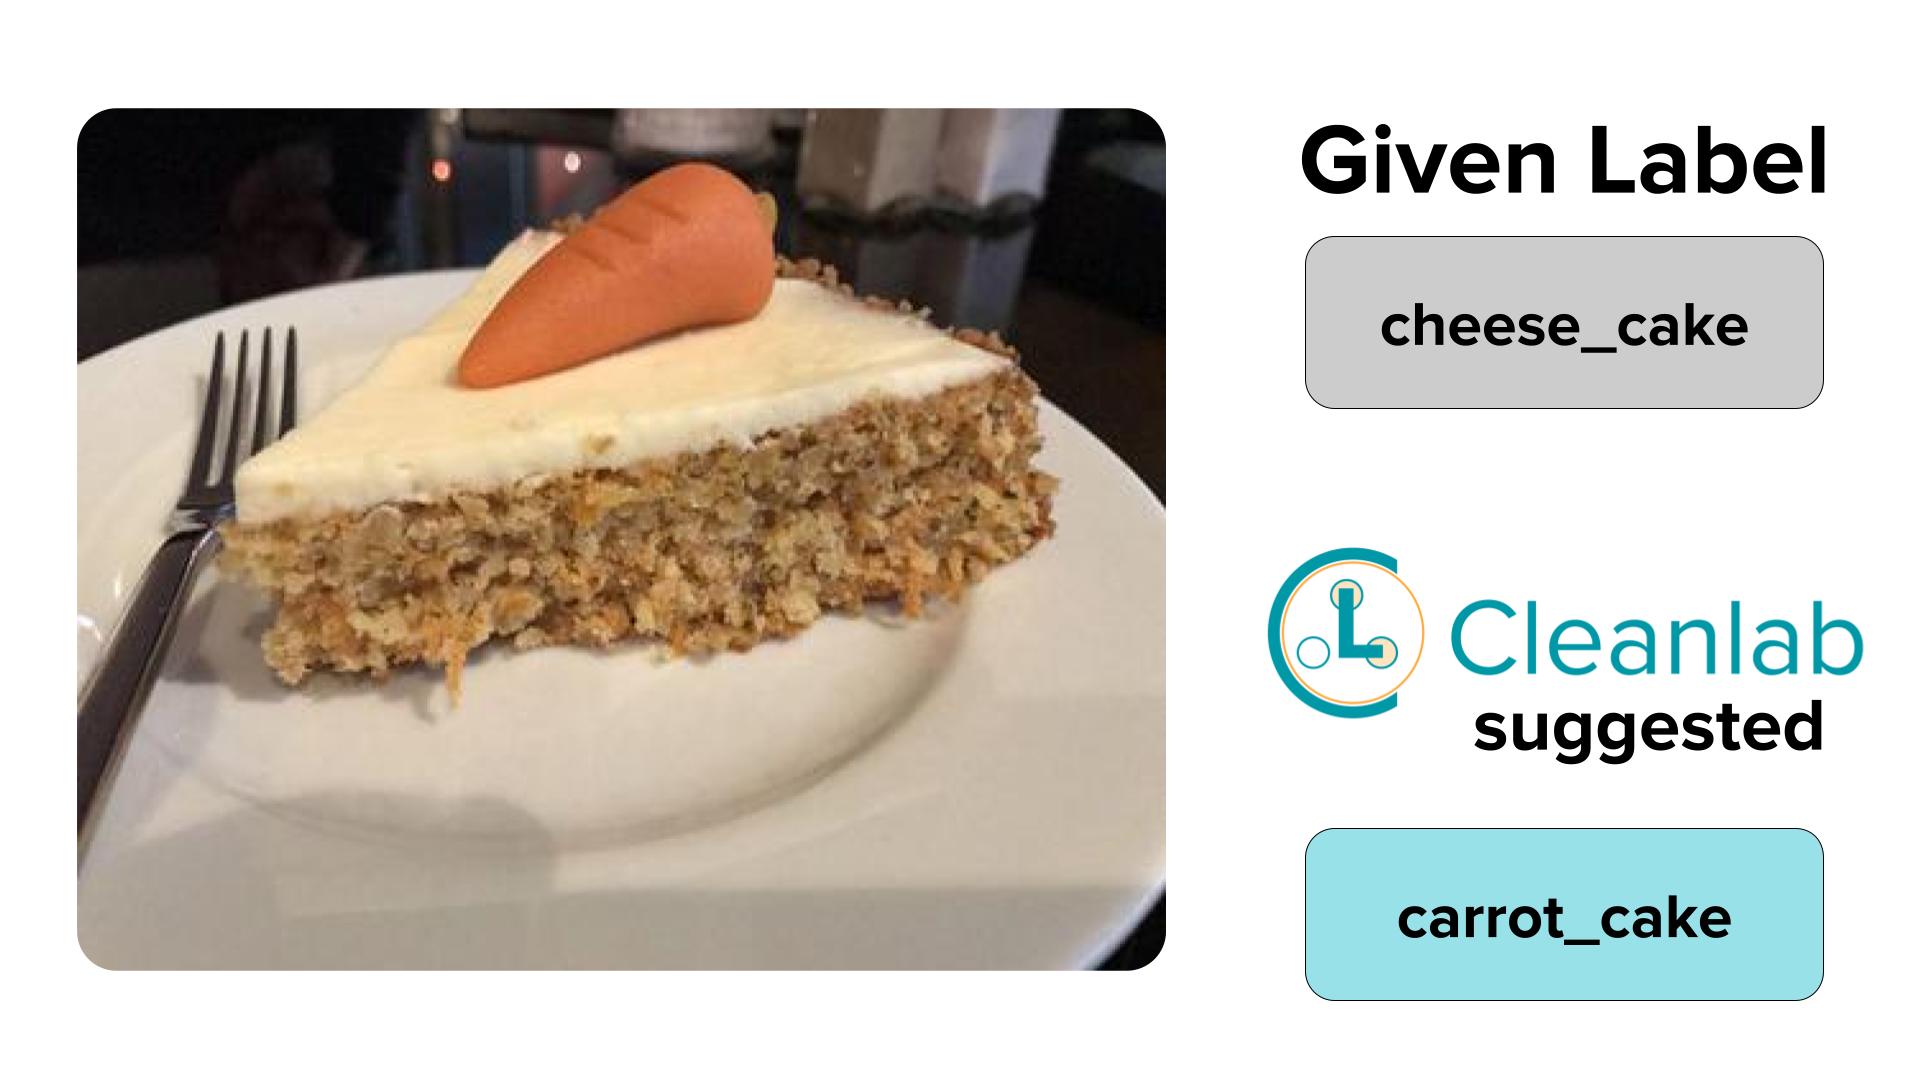 This image shows an example of a label error with a piece of carrot cake labeled as cheesecake.